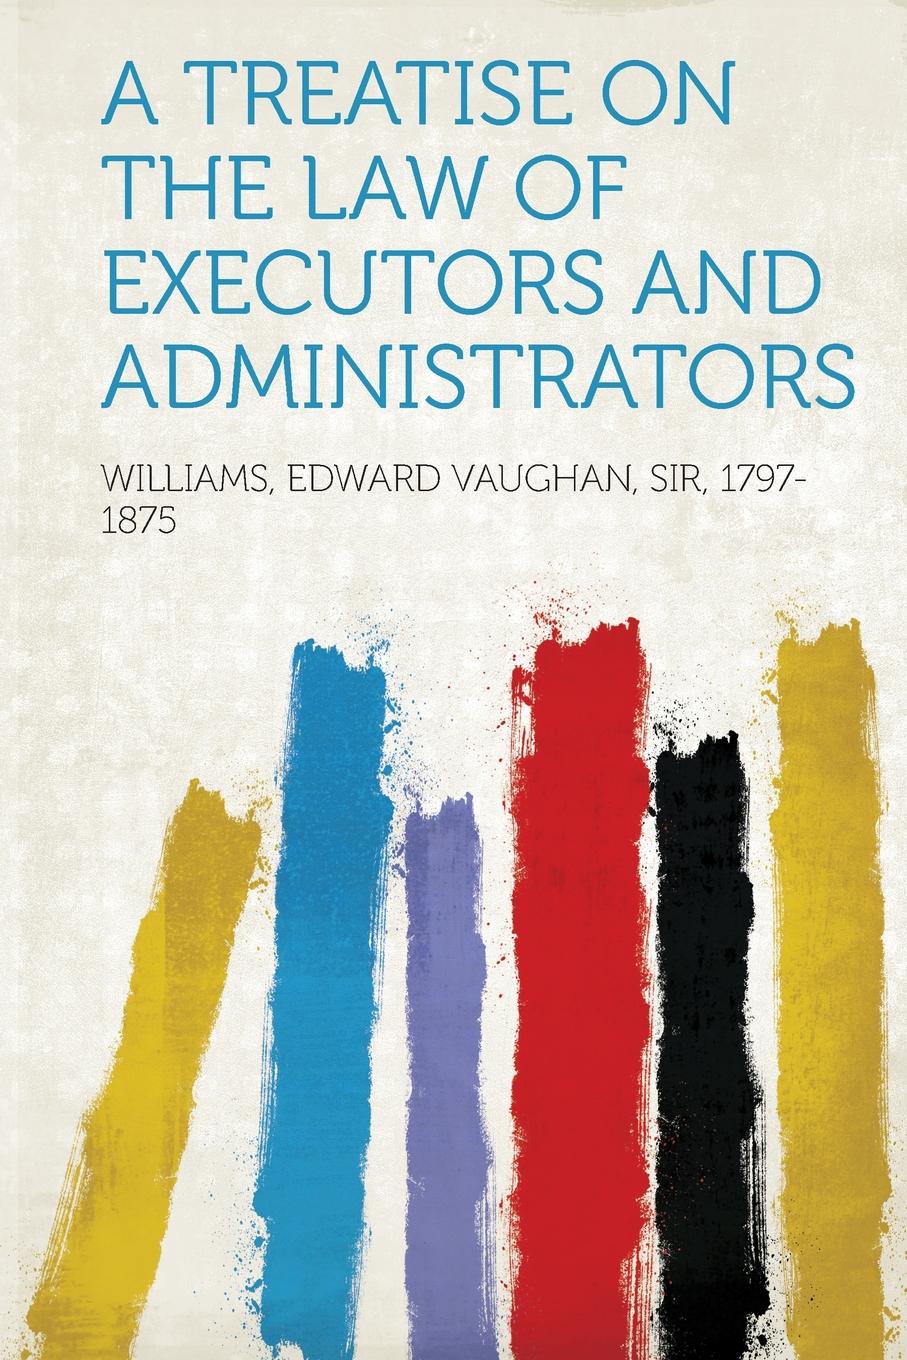 A Treatise on the Law of Executors and Administrators